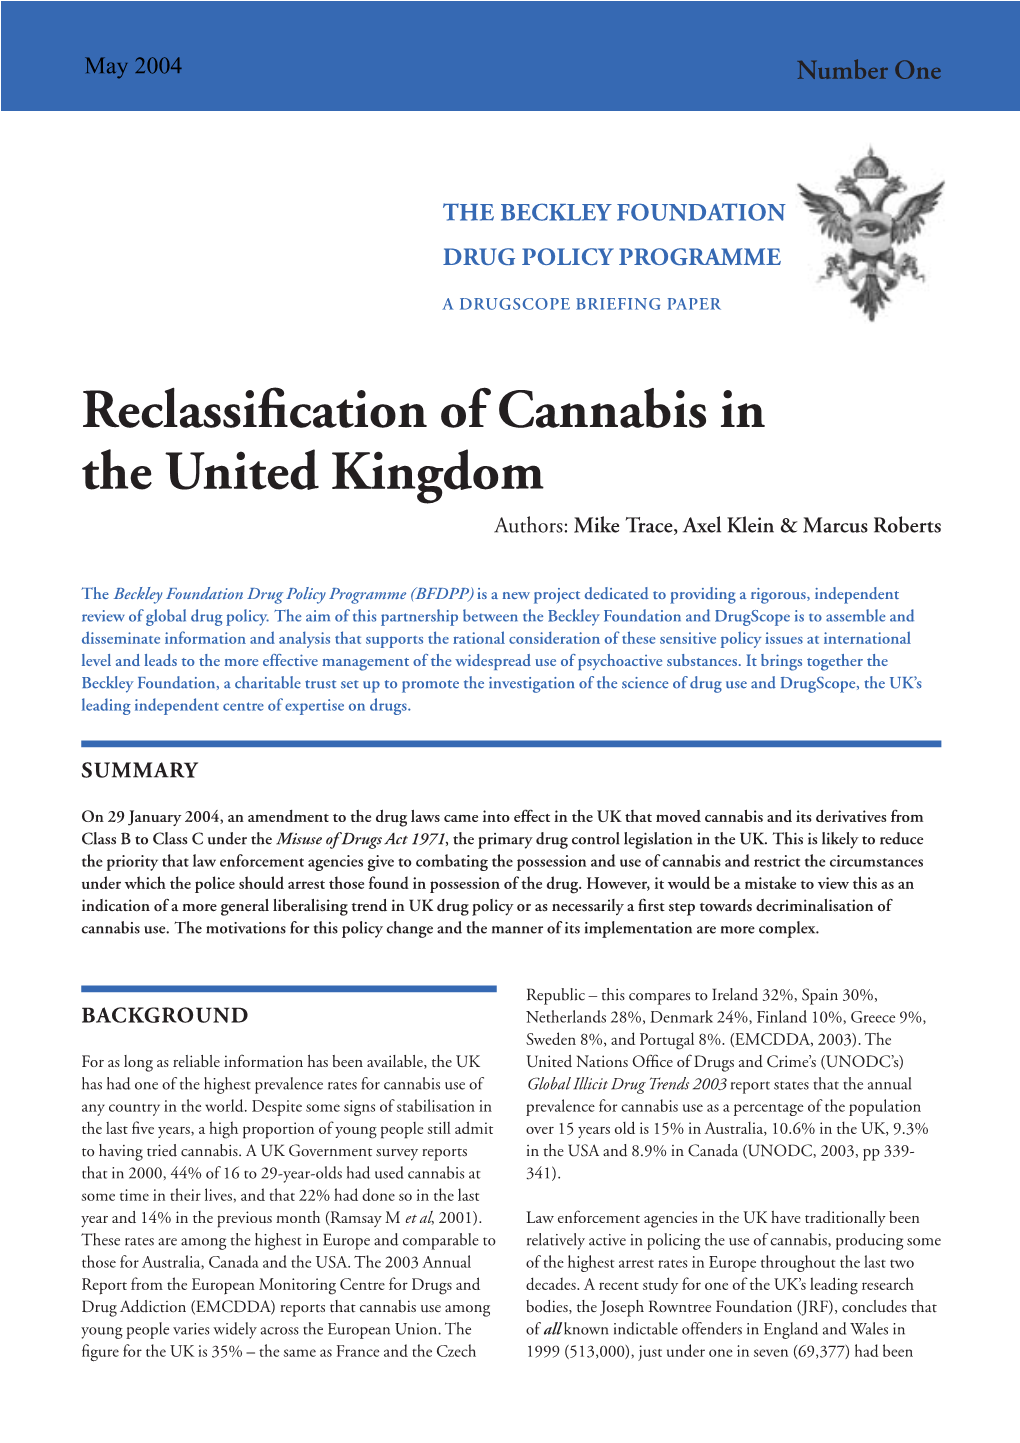 Reclassification of Cannabis in the United Kingdom